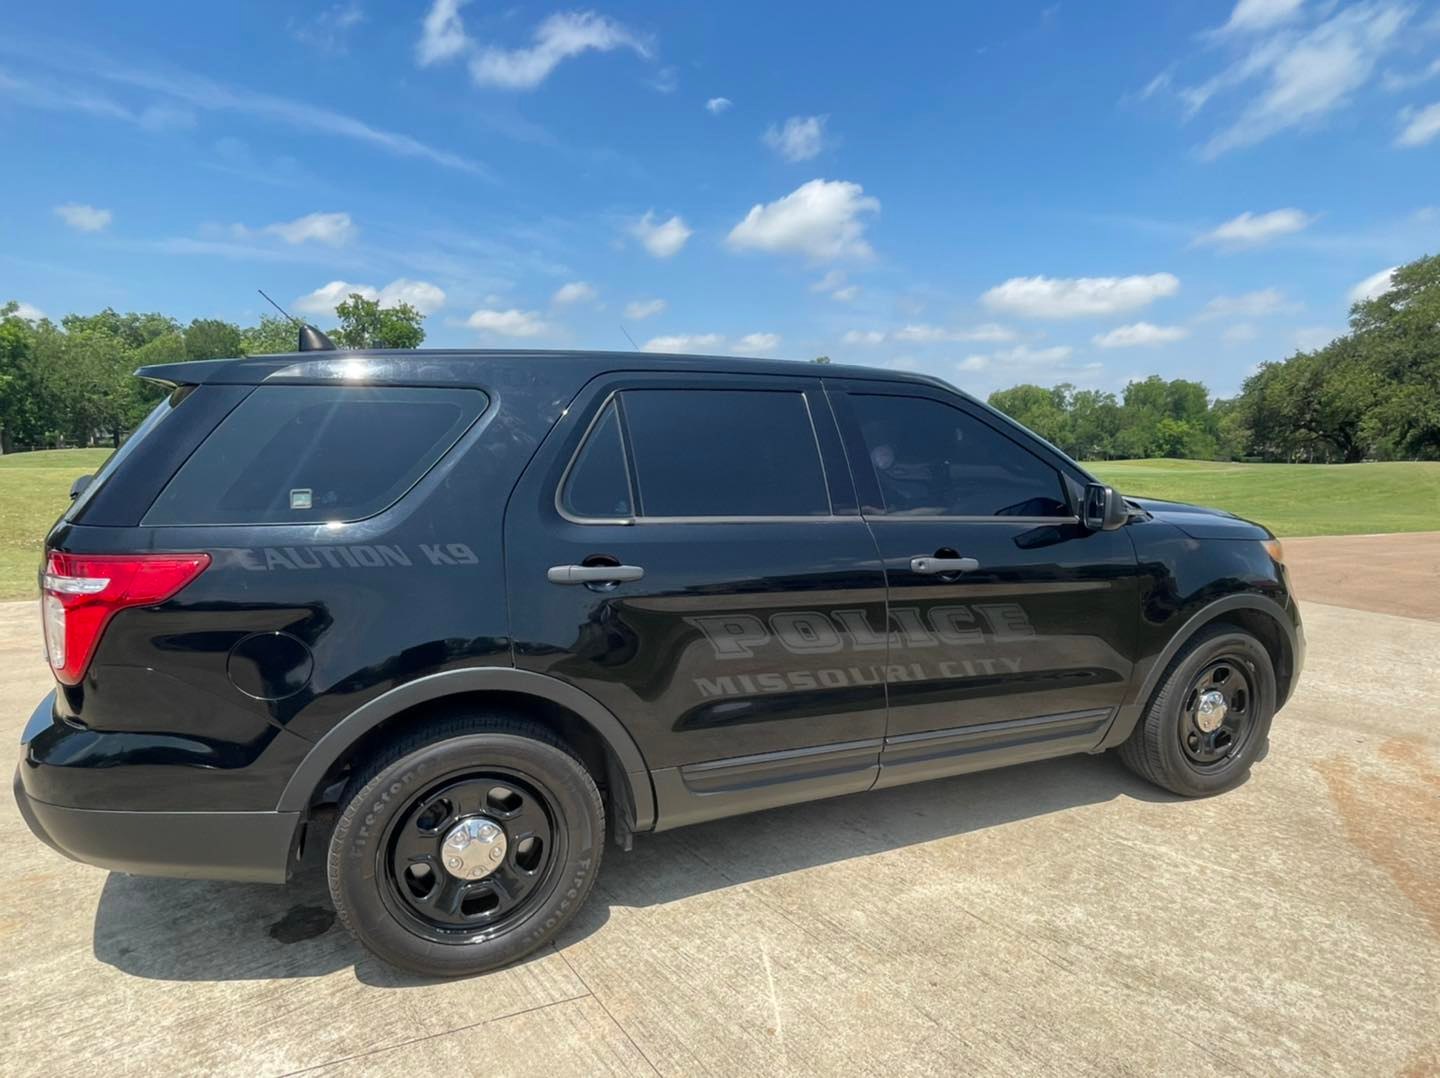 Missouri City police still investigating why man was in back of patrol cruiser at time of deadly crash | Houston Public Media